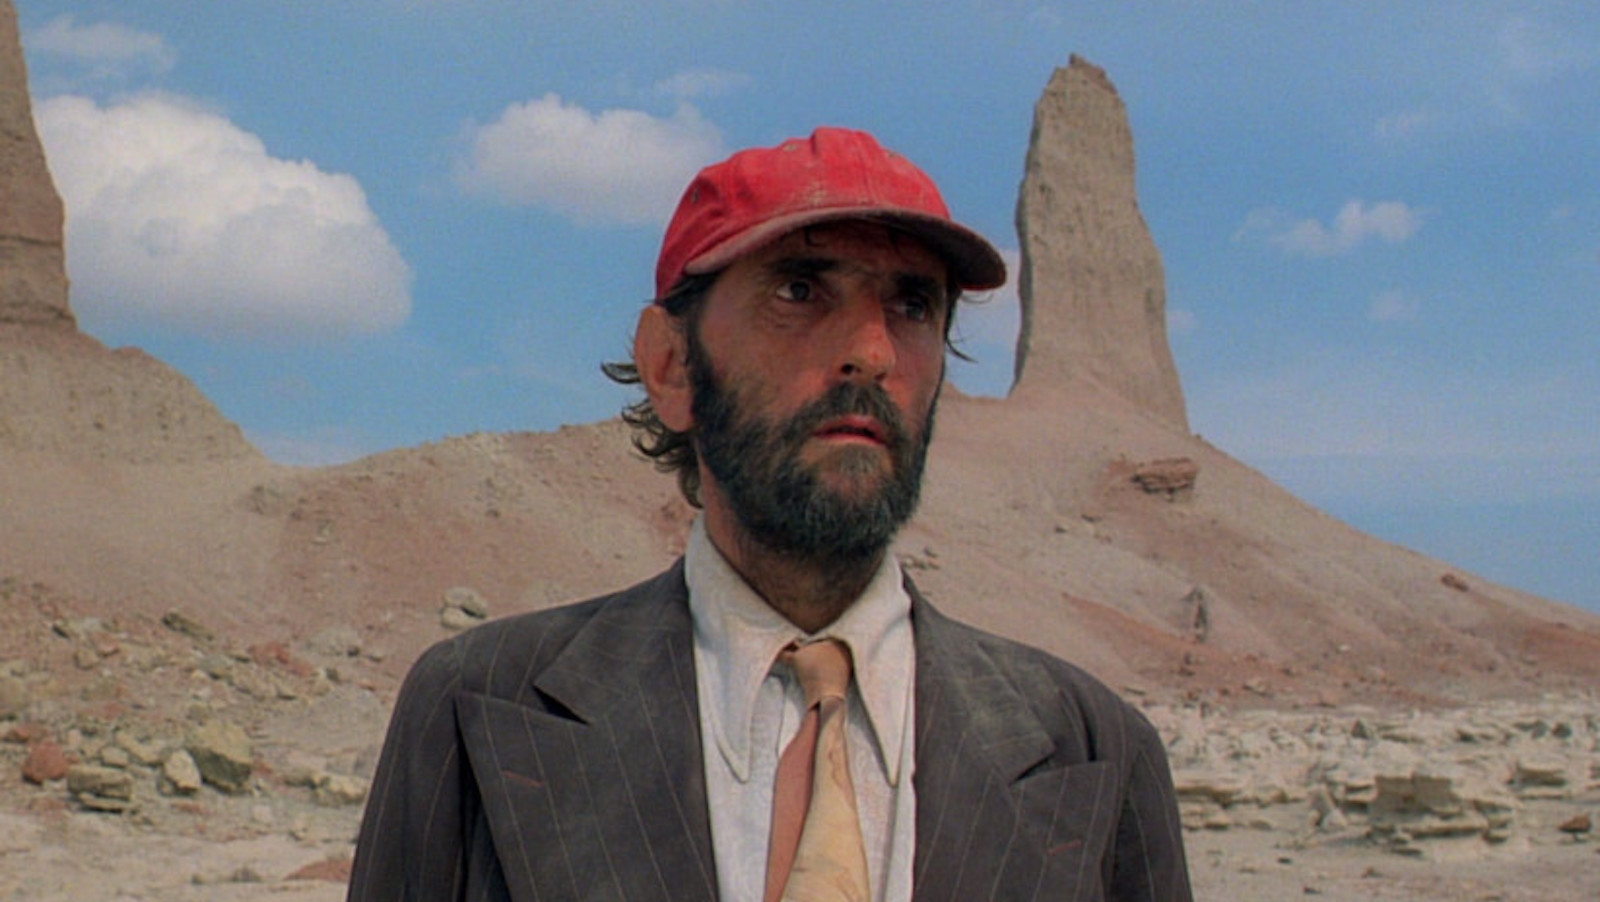 A bearded man in a red baseball cap stands in front of a sandstone tower in the desert, looking off camera